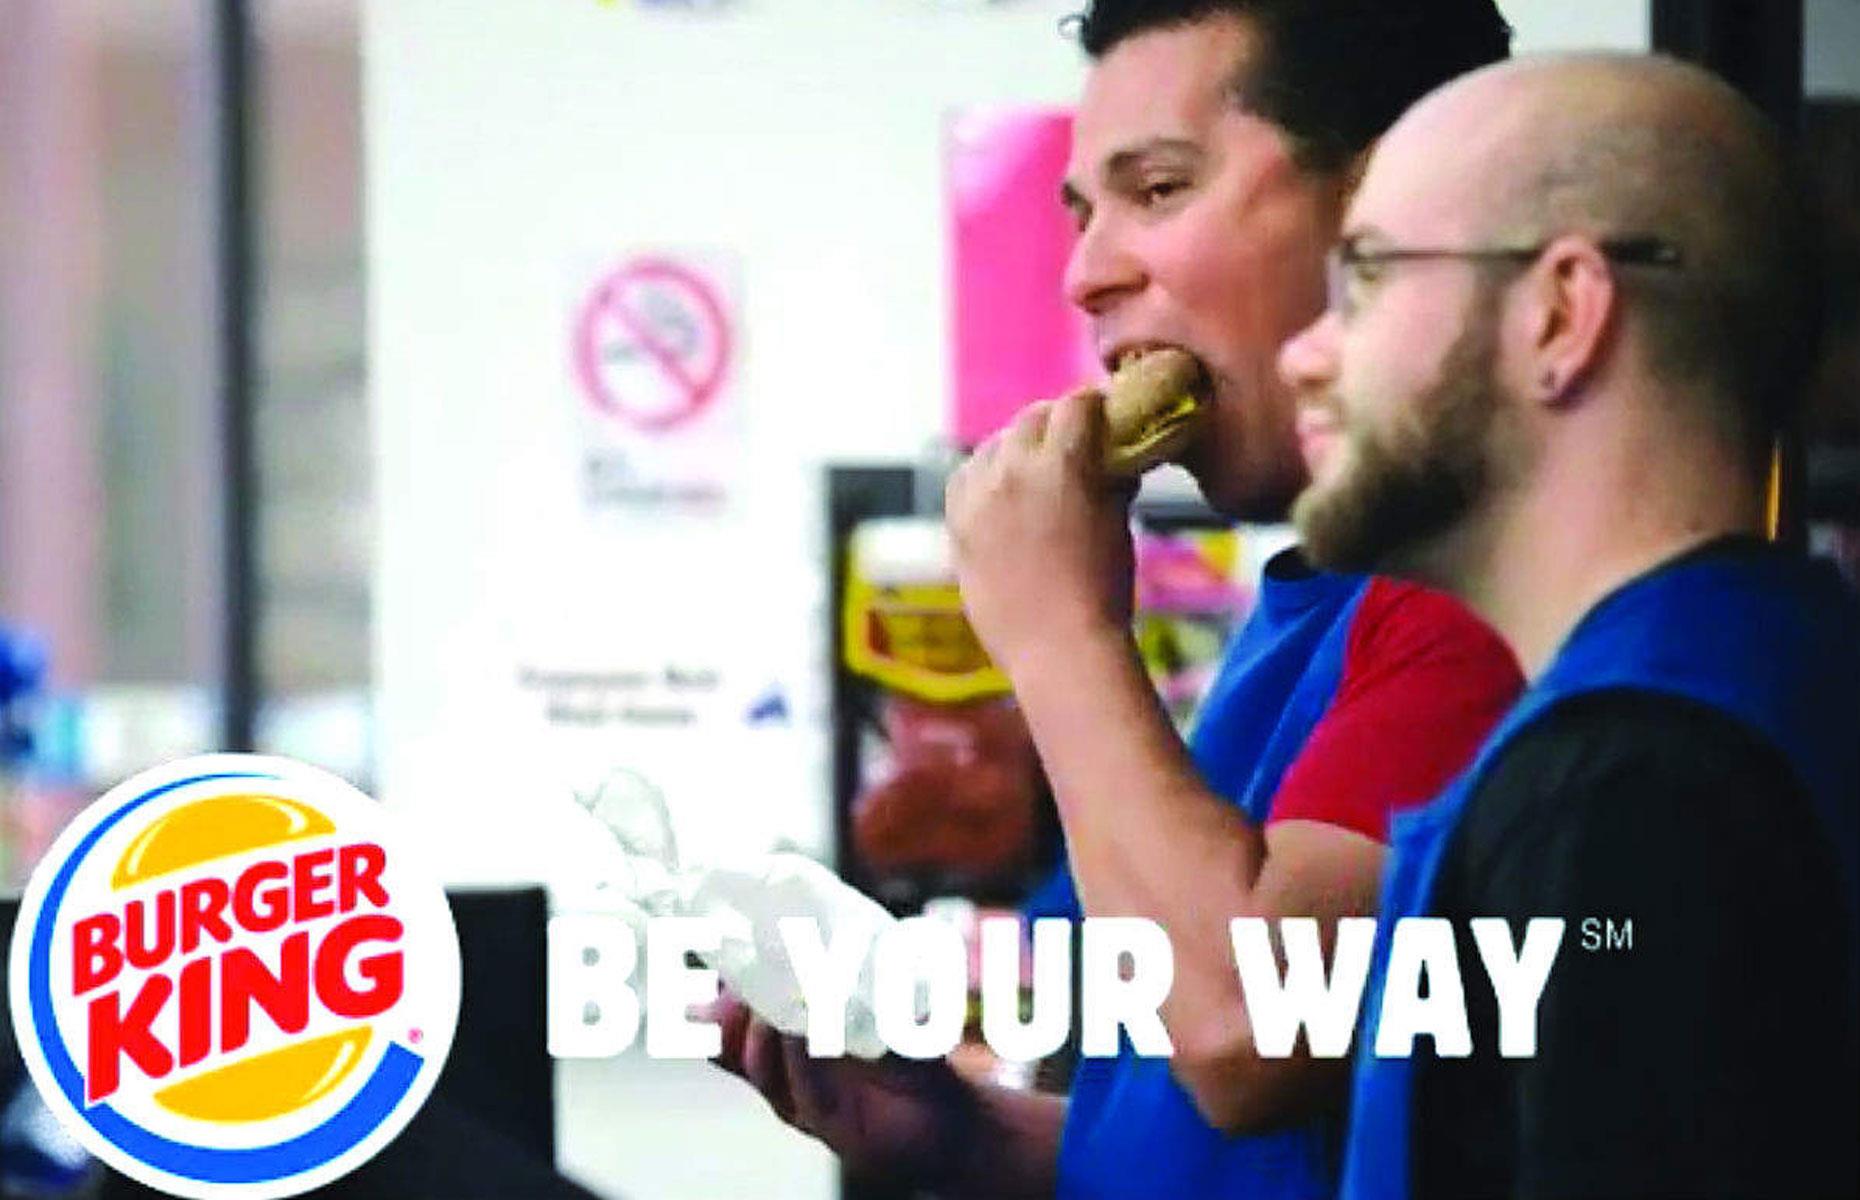 Have it your way – Burger King